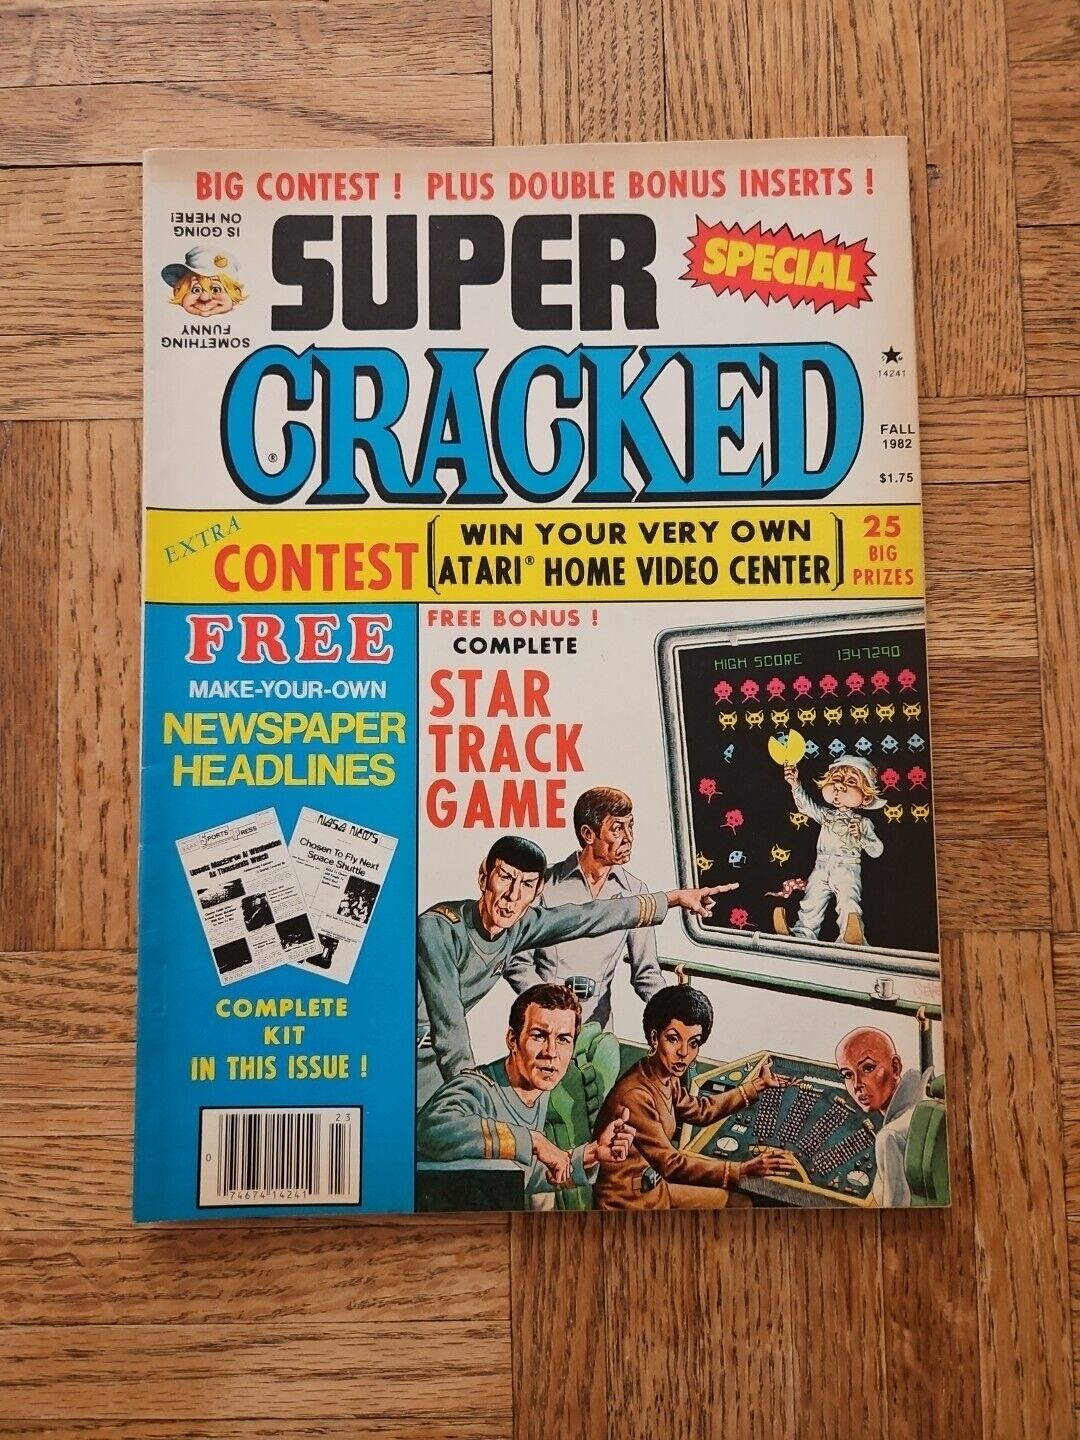 Super Cracked Magazine Special Contest Issue Fall 1982 Good